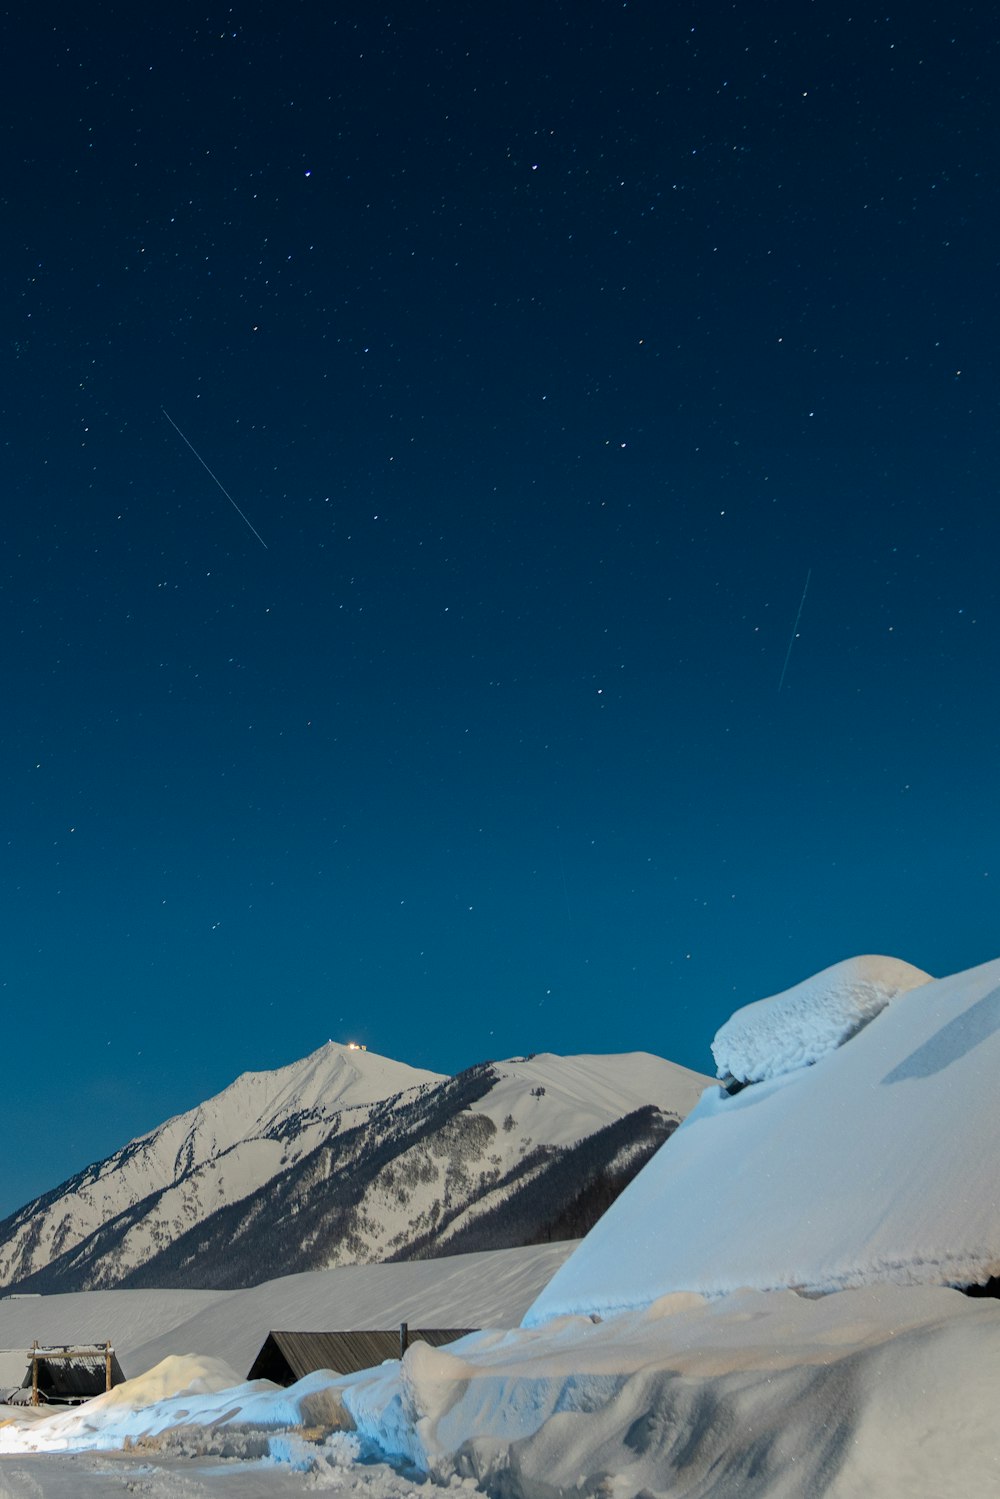 the night sky over a snow covered mountain range